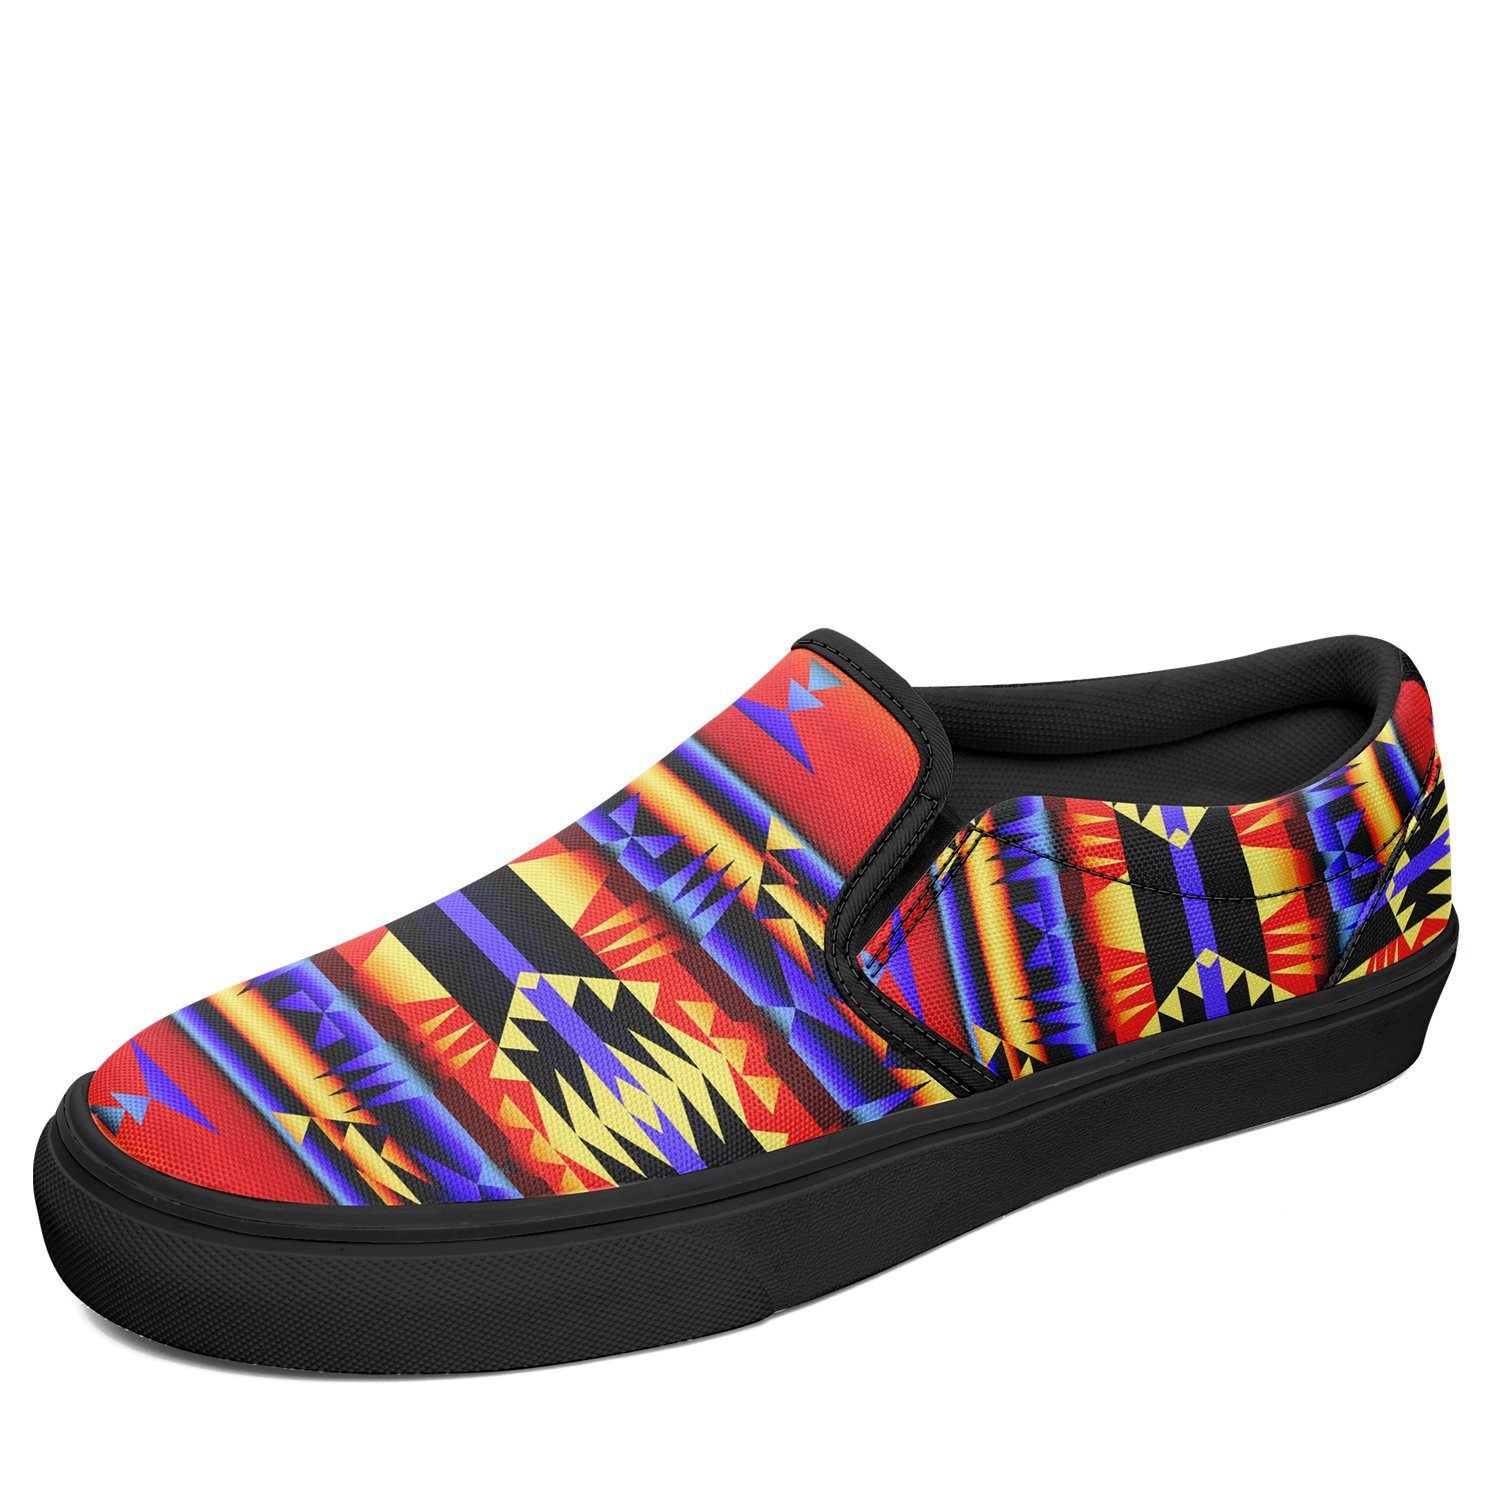 Between the San Juan Mountains Otoyimm Kid's Canvas Slip On Shoes 49 Dzine US Youth 1 / EUR 32 Black Sole 